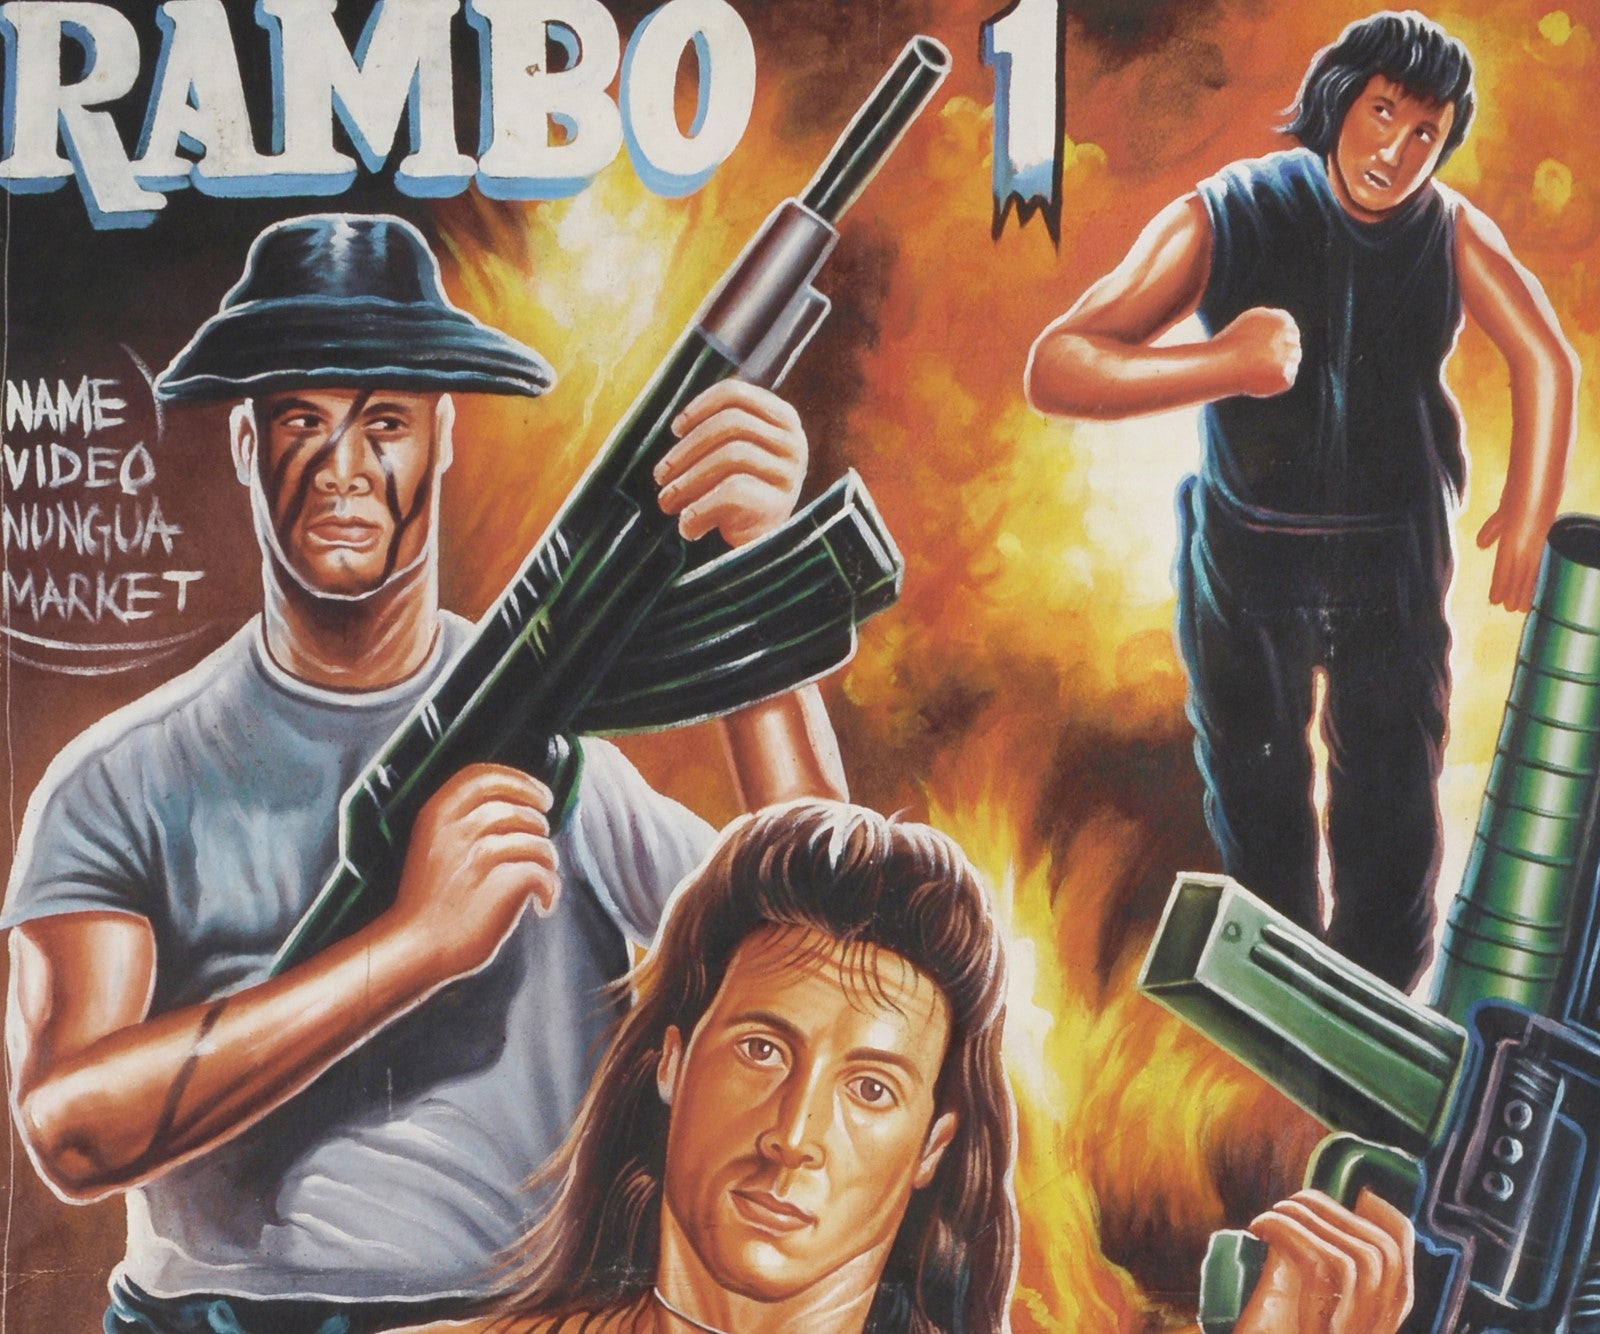 FIRST BLOOD MOVIE POSTER RAMBO HAND PAINTED IN GHANA FOR THE LOCAL CINEMA MORE DETAILS